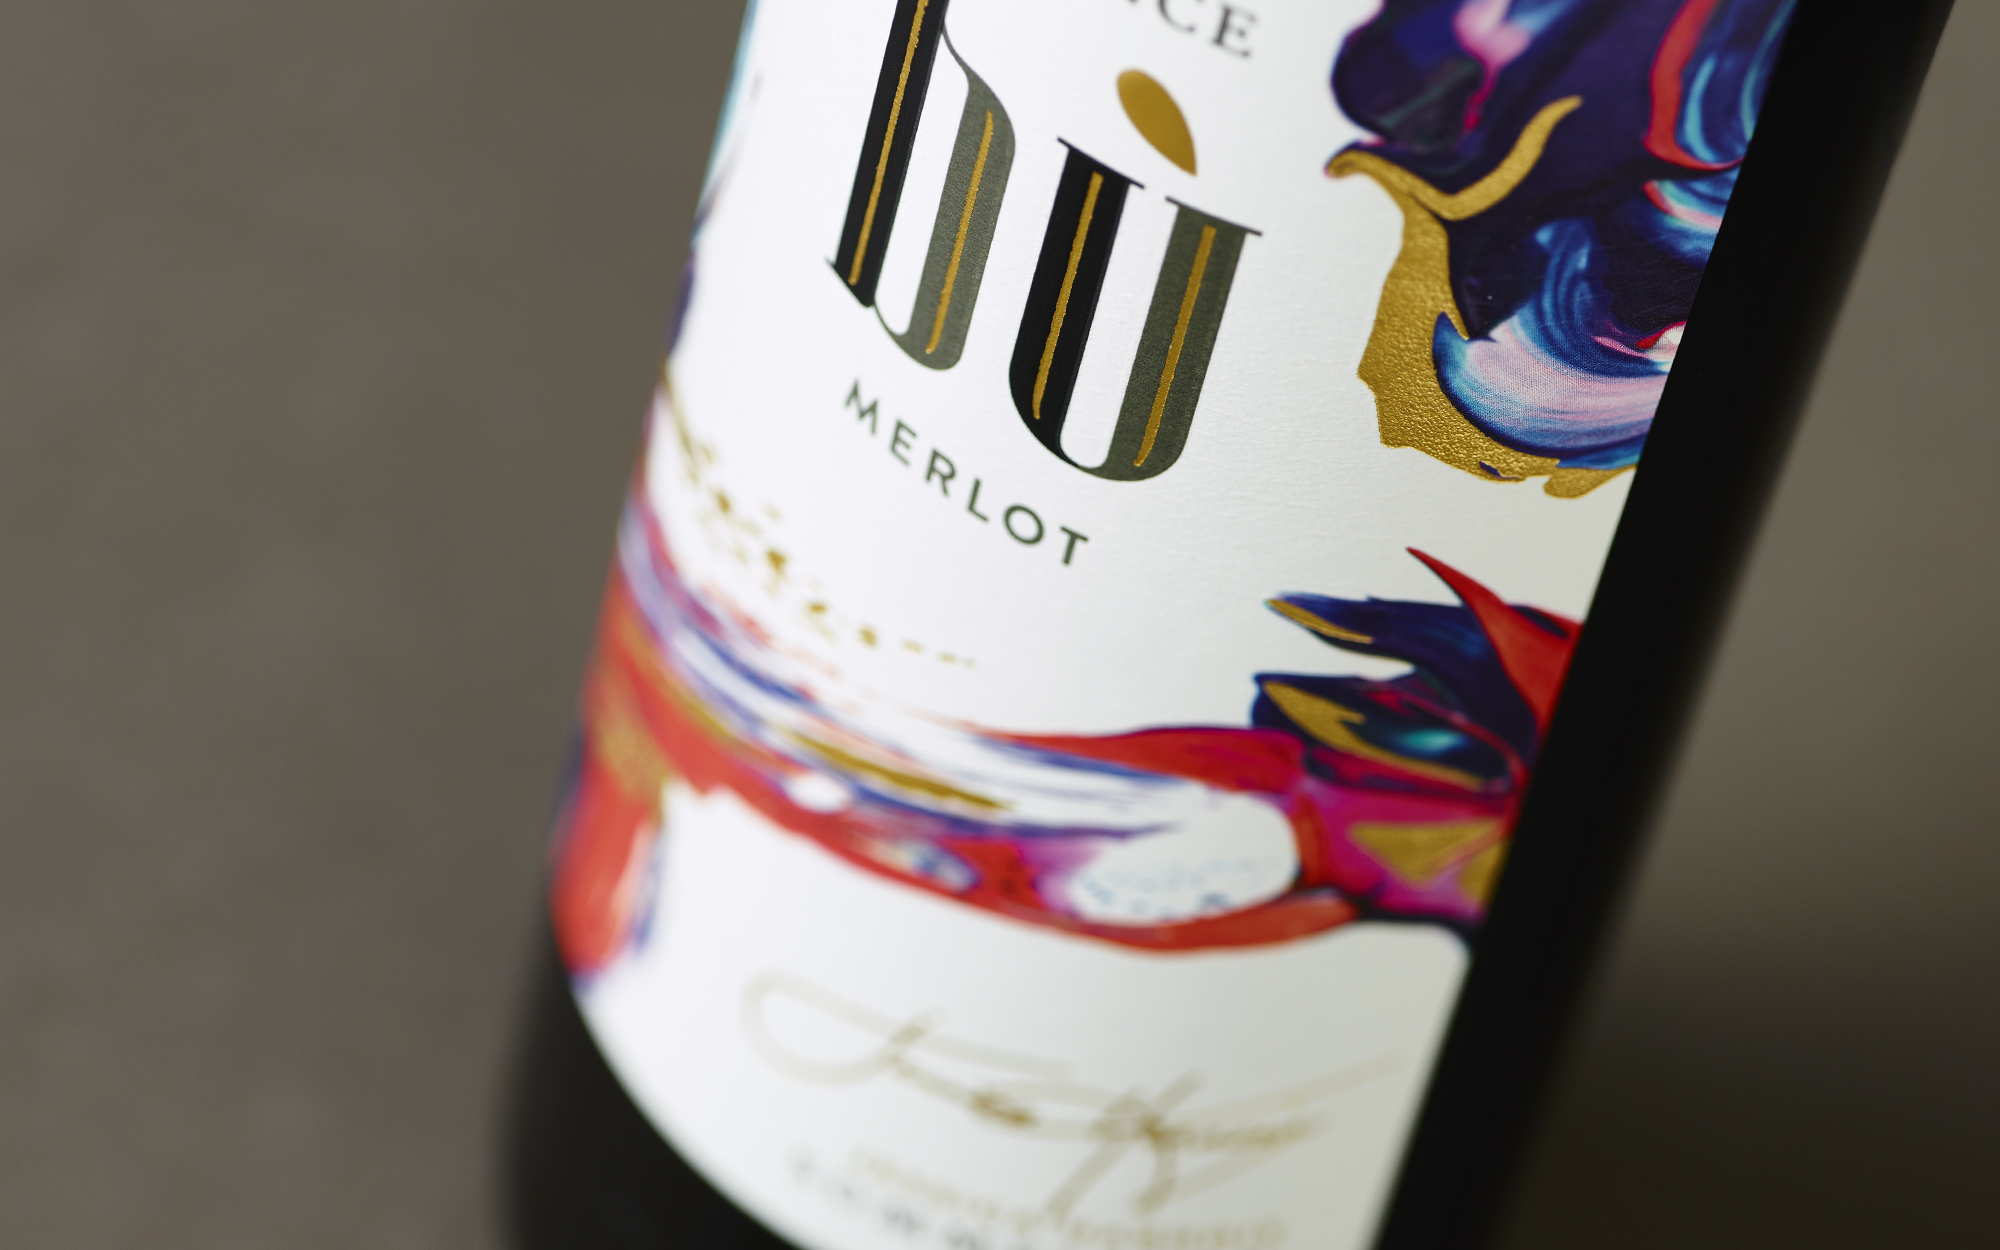 Bu Wine France Wine Label Design | Dossier Creative | Cross Channel Wine Brand with Boutique Flair